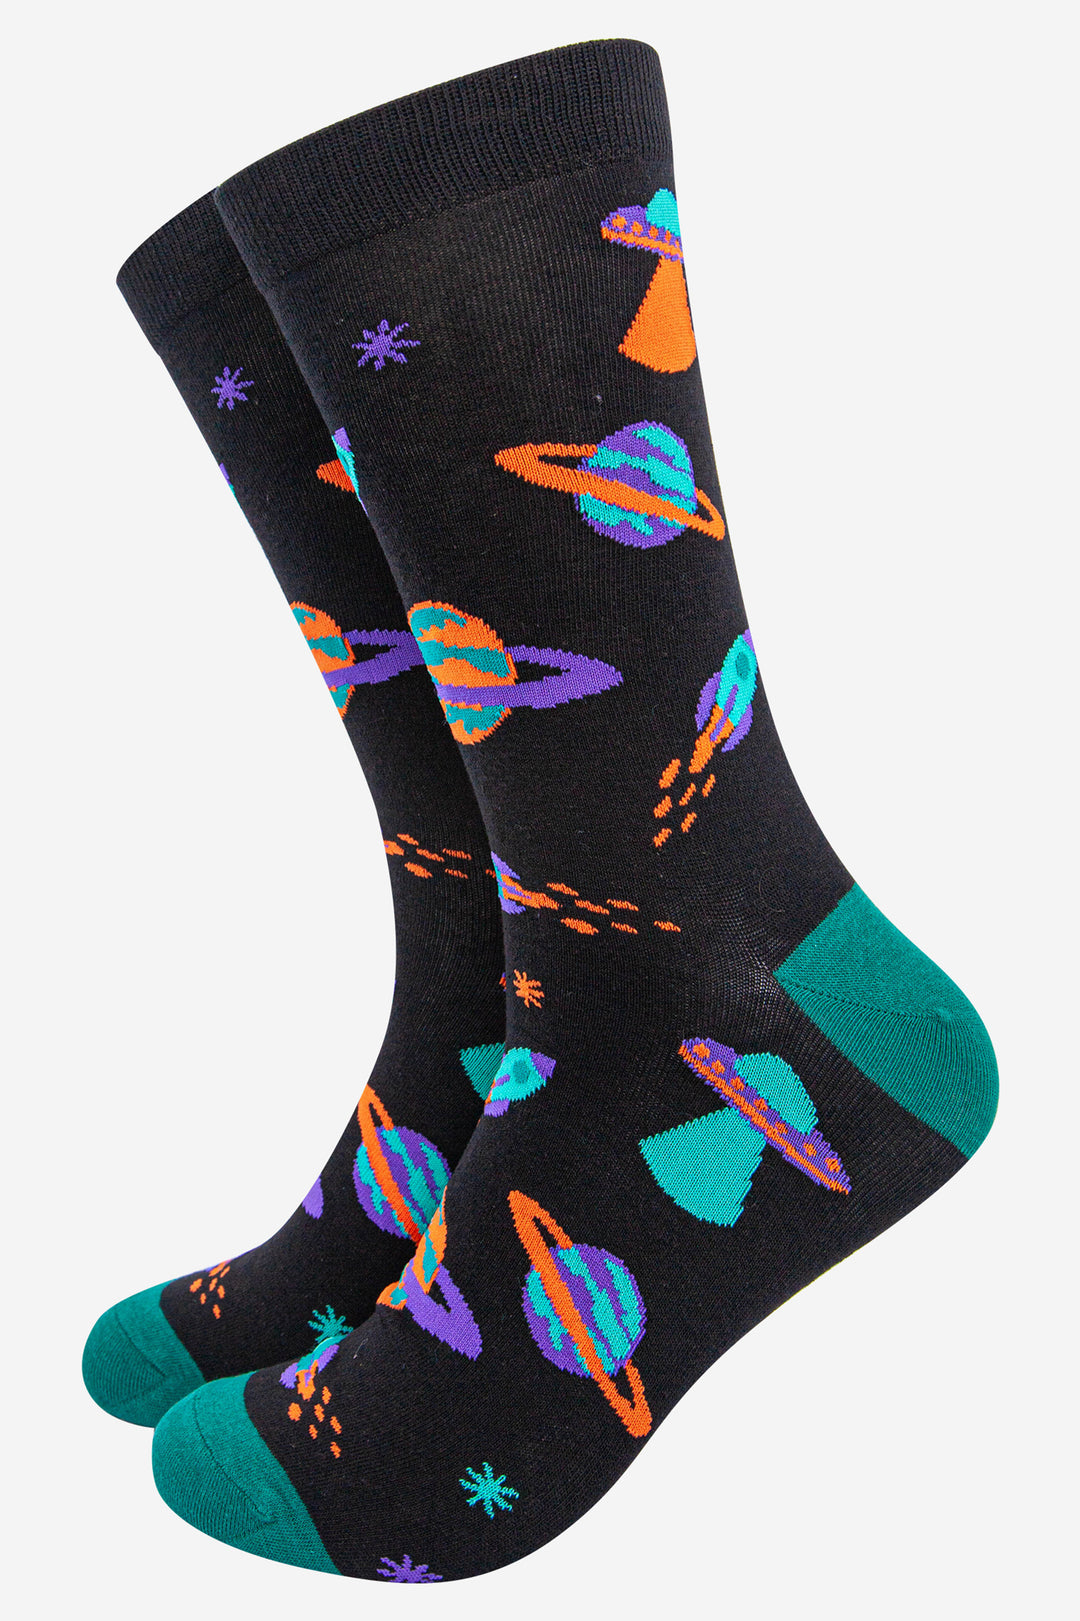 black bamboo socks with green heel and toe with an all over pattern of colourful planets, ufos and stars